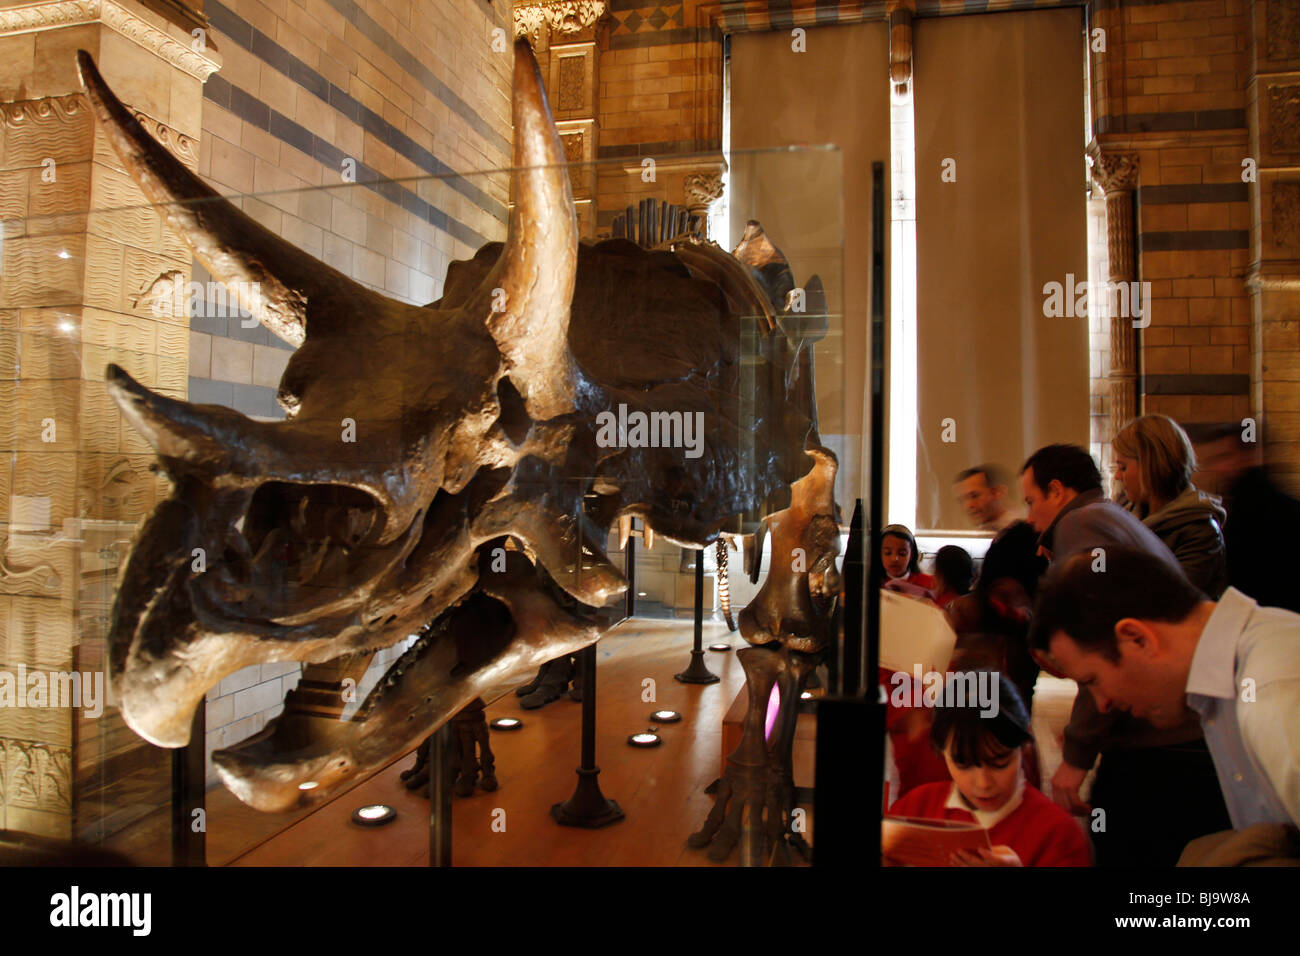 The Natural History Museum, London. Dinosaur gallery. The bones of a Triceratops is marveled at by visitors. Stock Photo